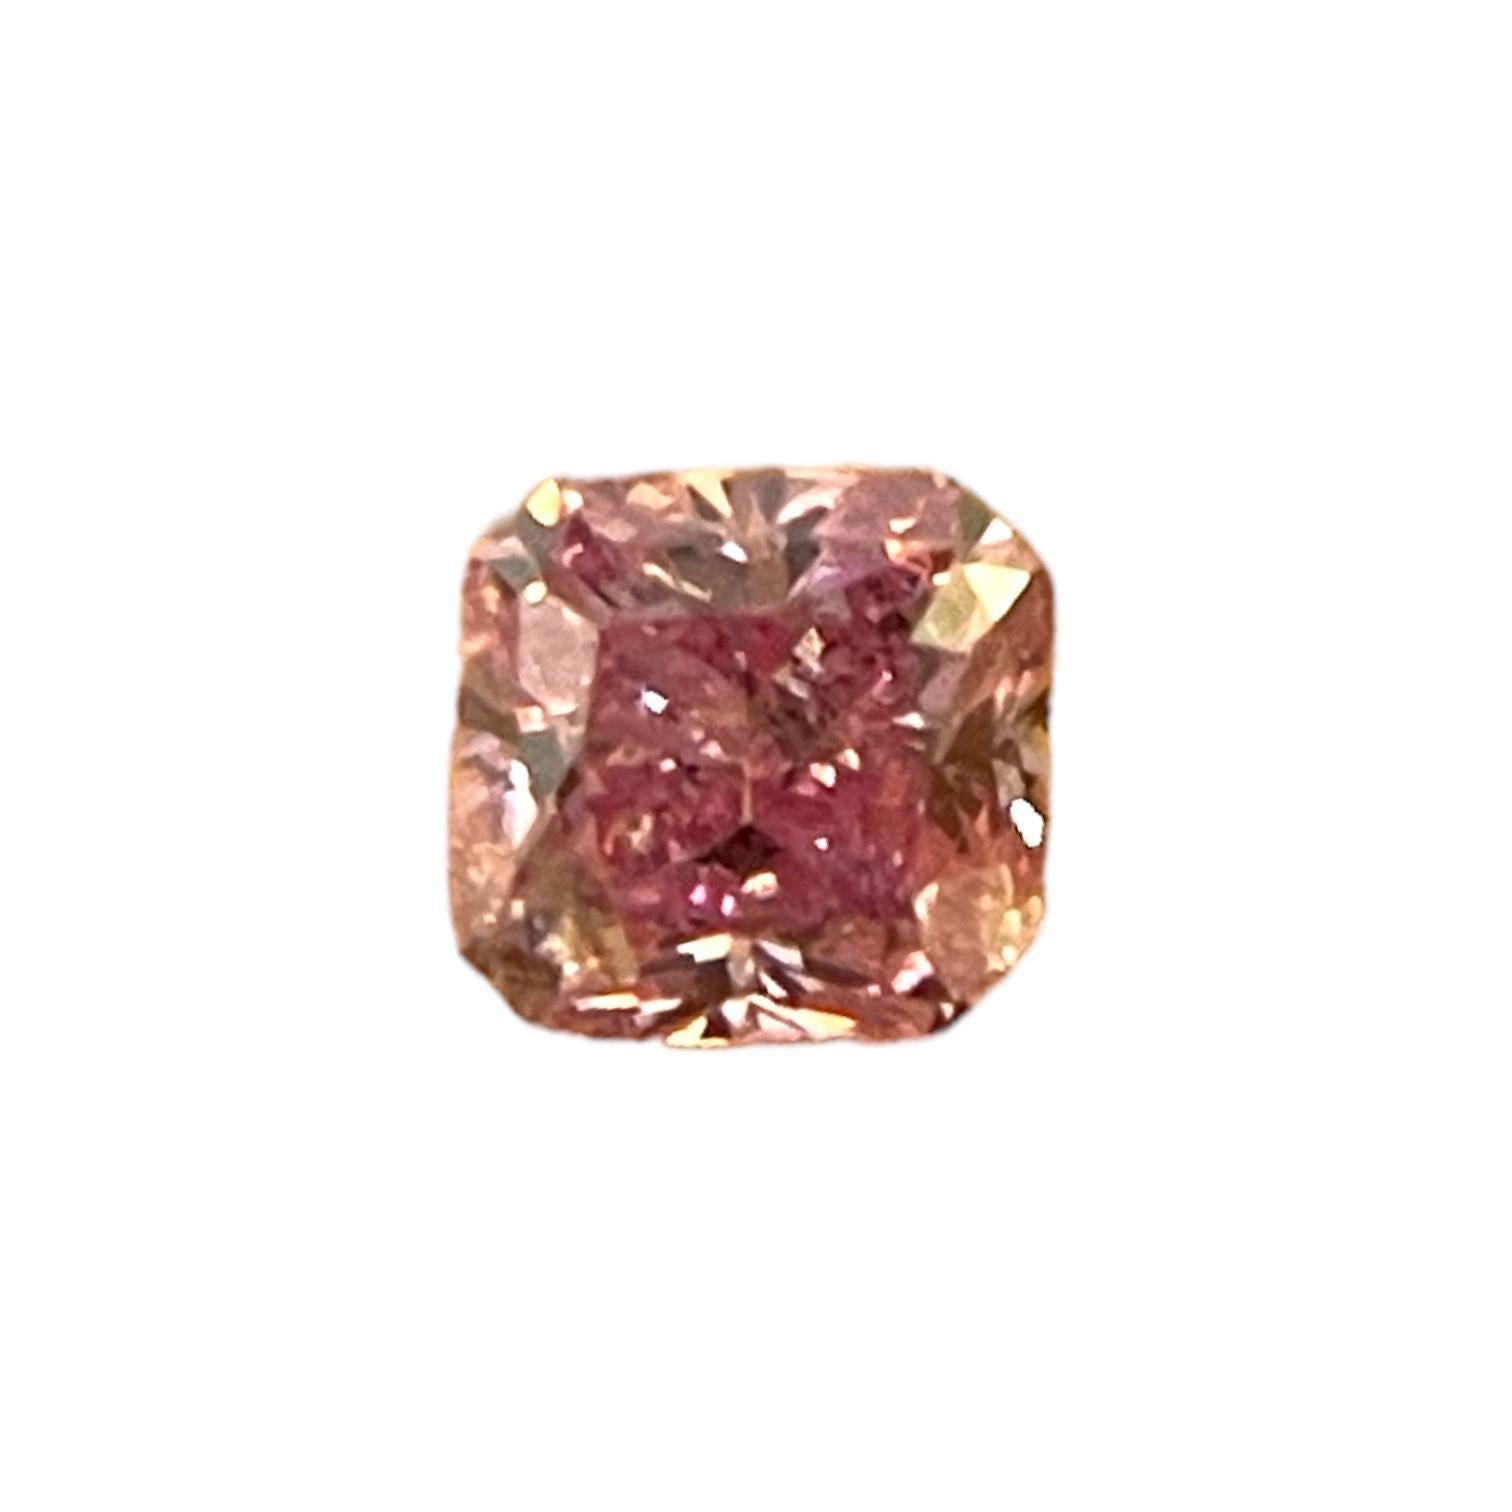 Modern GIA Certified 0.14 TCW Radiant Fancy Intense Purple Pink Natural Diamond For Sale